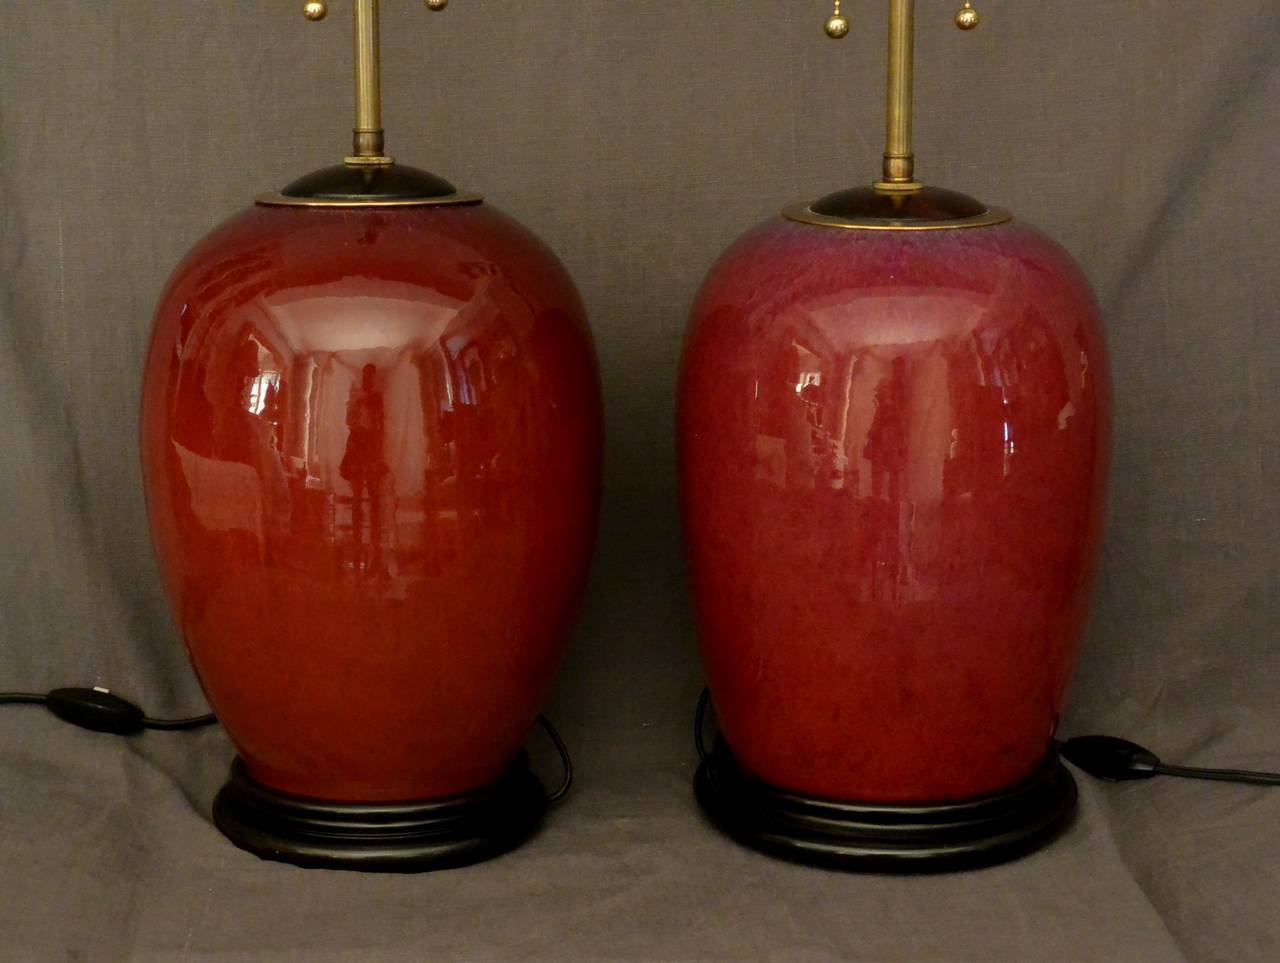 Near pair of flambe Sang de Boeuf lamps of ginger jar form on wood base. China, early 19th century. Newly electrified with black silk cord and switch.
Dimension:
Lamp 1: 8